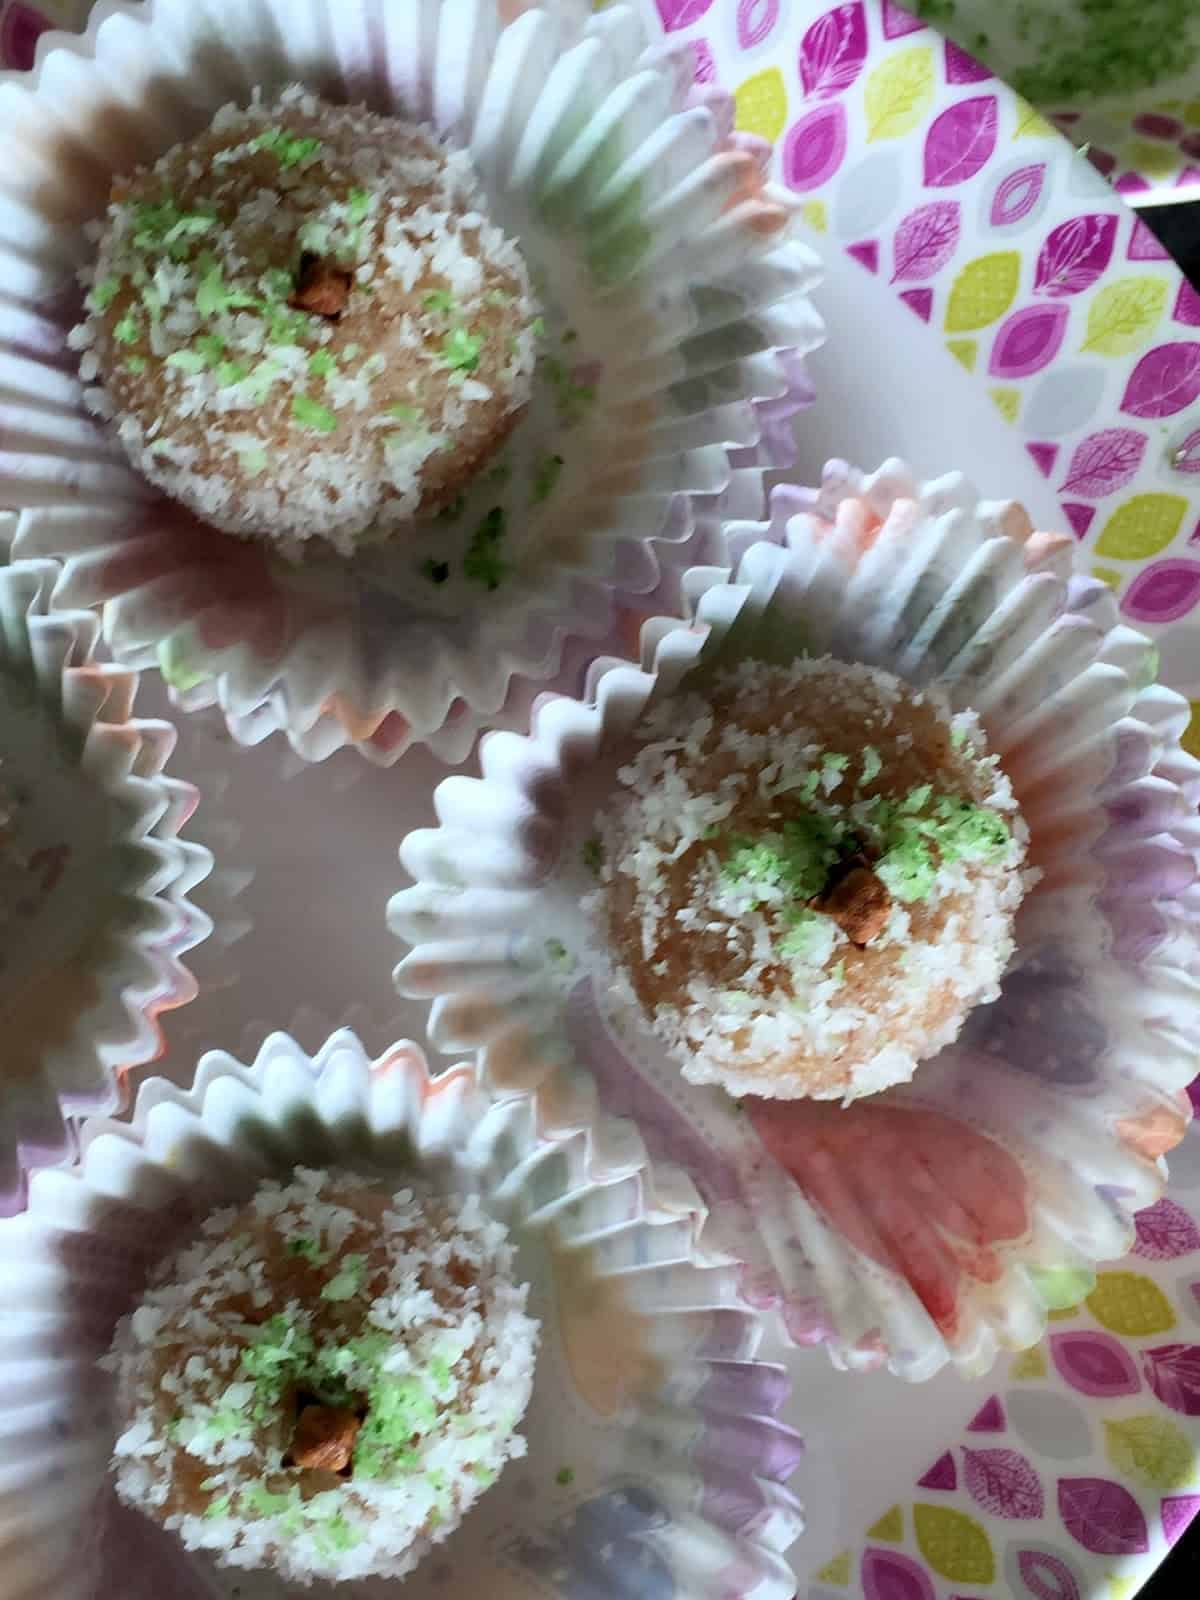 Beijinho de Coco are utterly delish, quick to make Brazilian Coconut and Nut Truffles. Perfect for sweet nibbles or at kids parties.